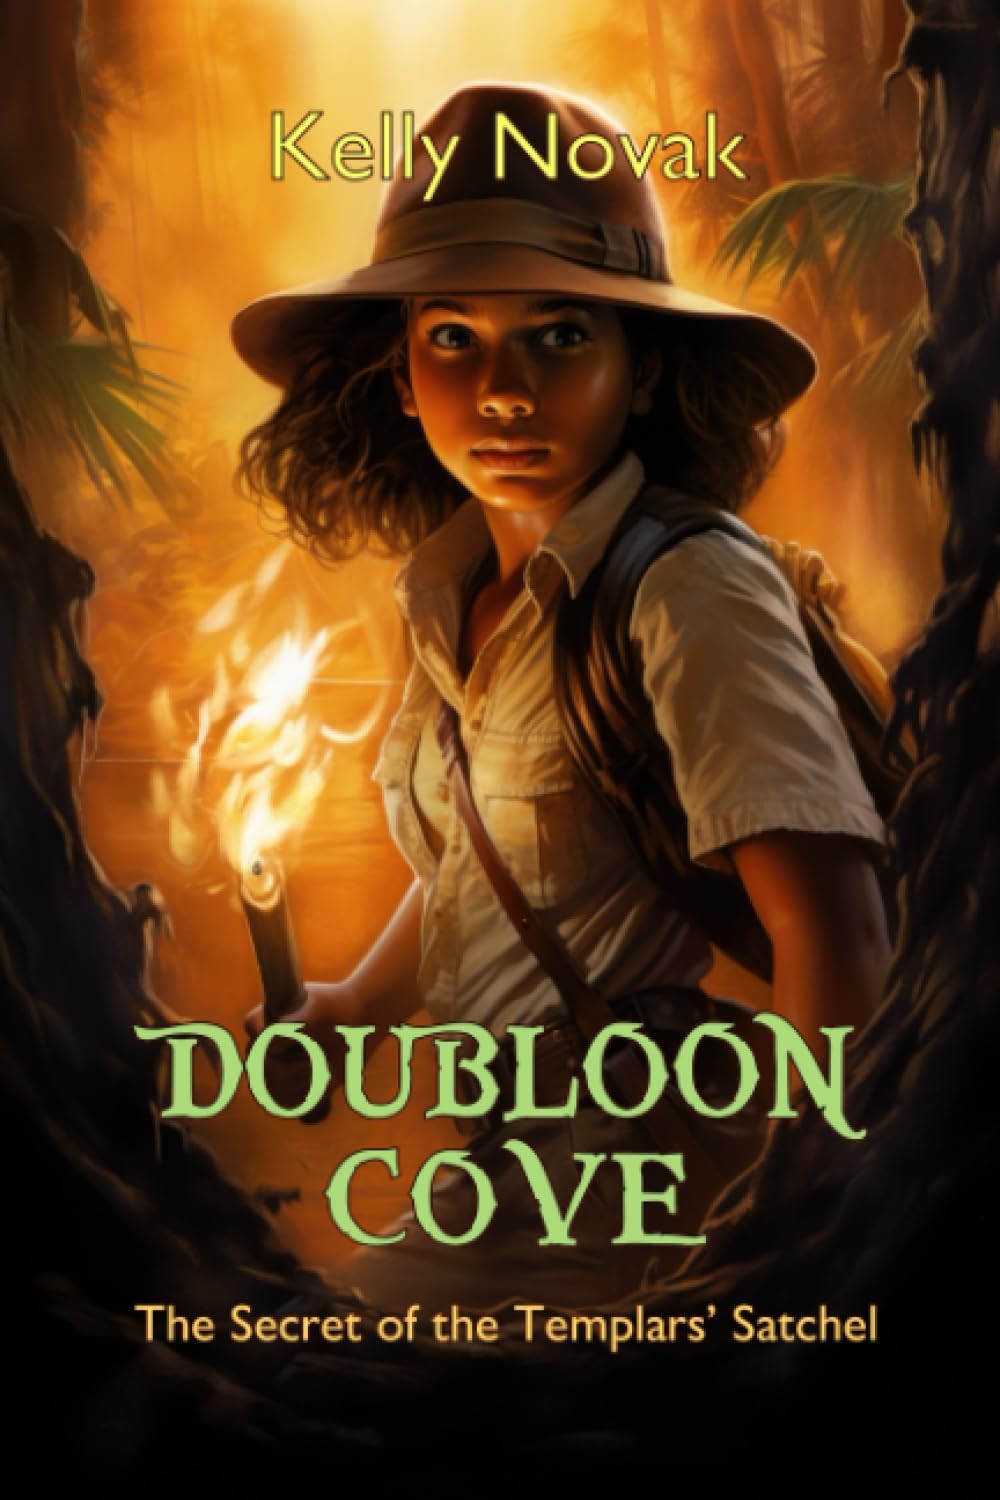 Doubloon Cove Series Returns with a Riveting Sequel: "Doubloon Cove: The Secret of the Templars' Satchel"